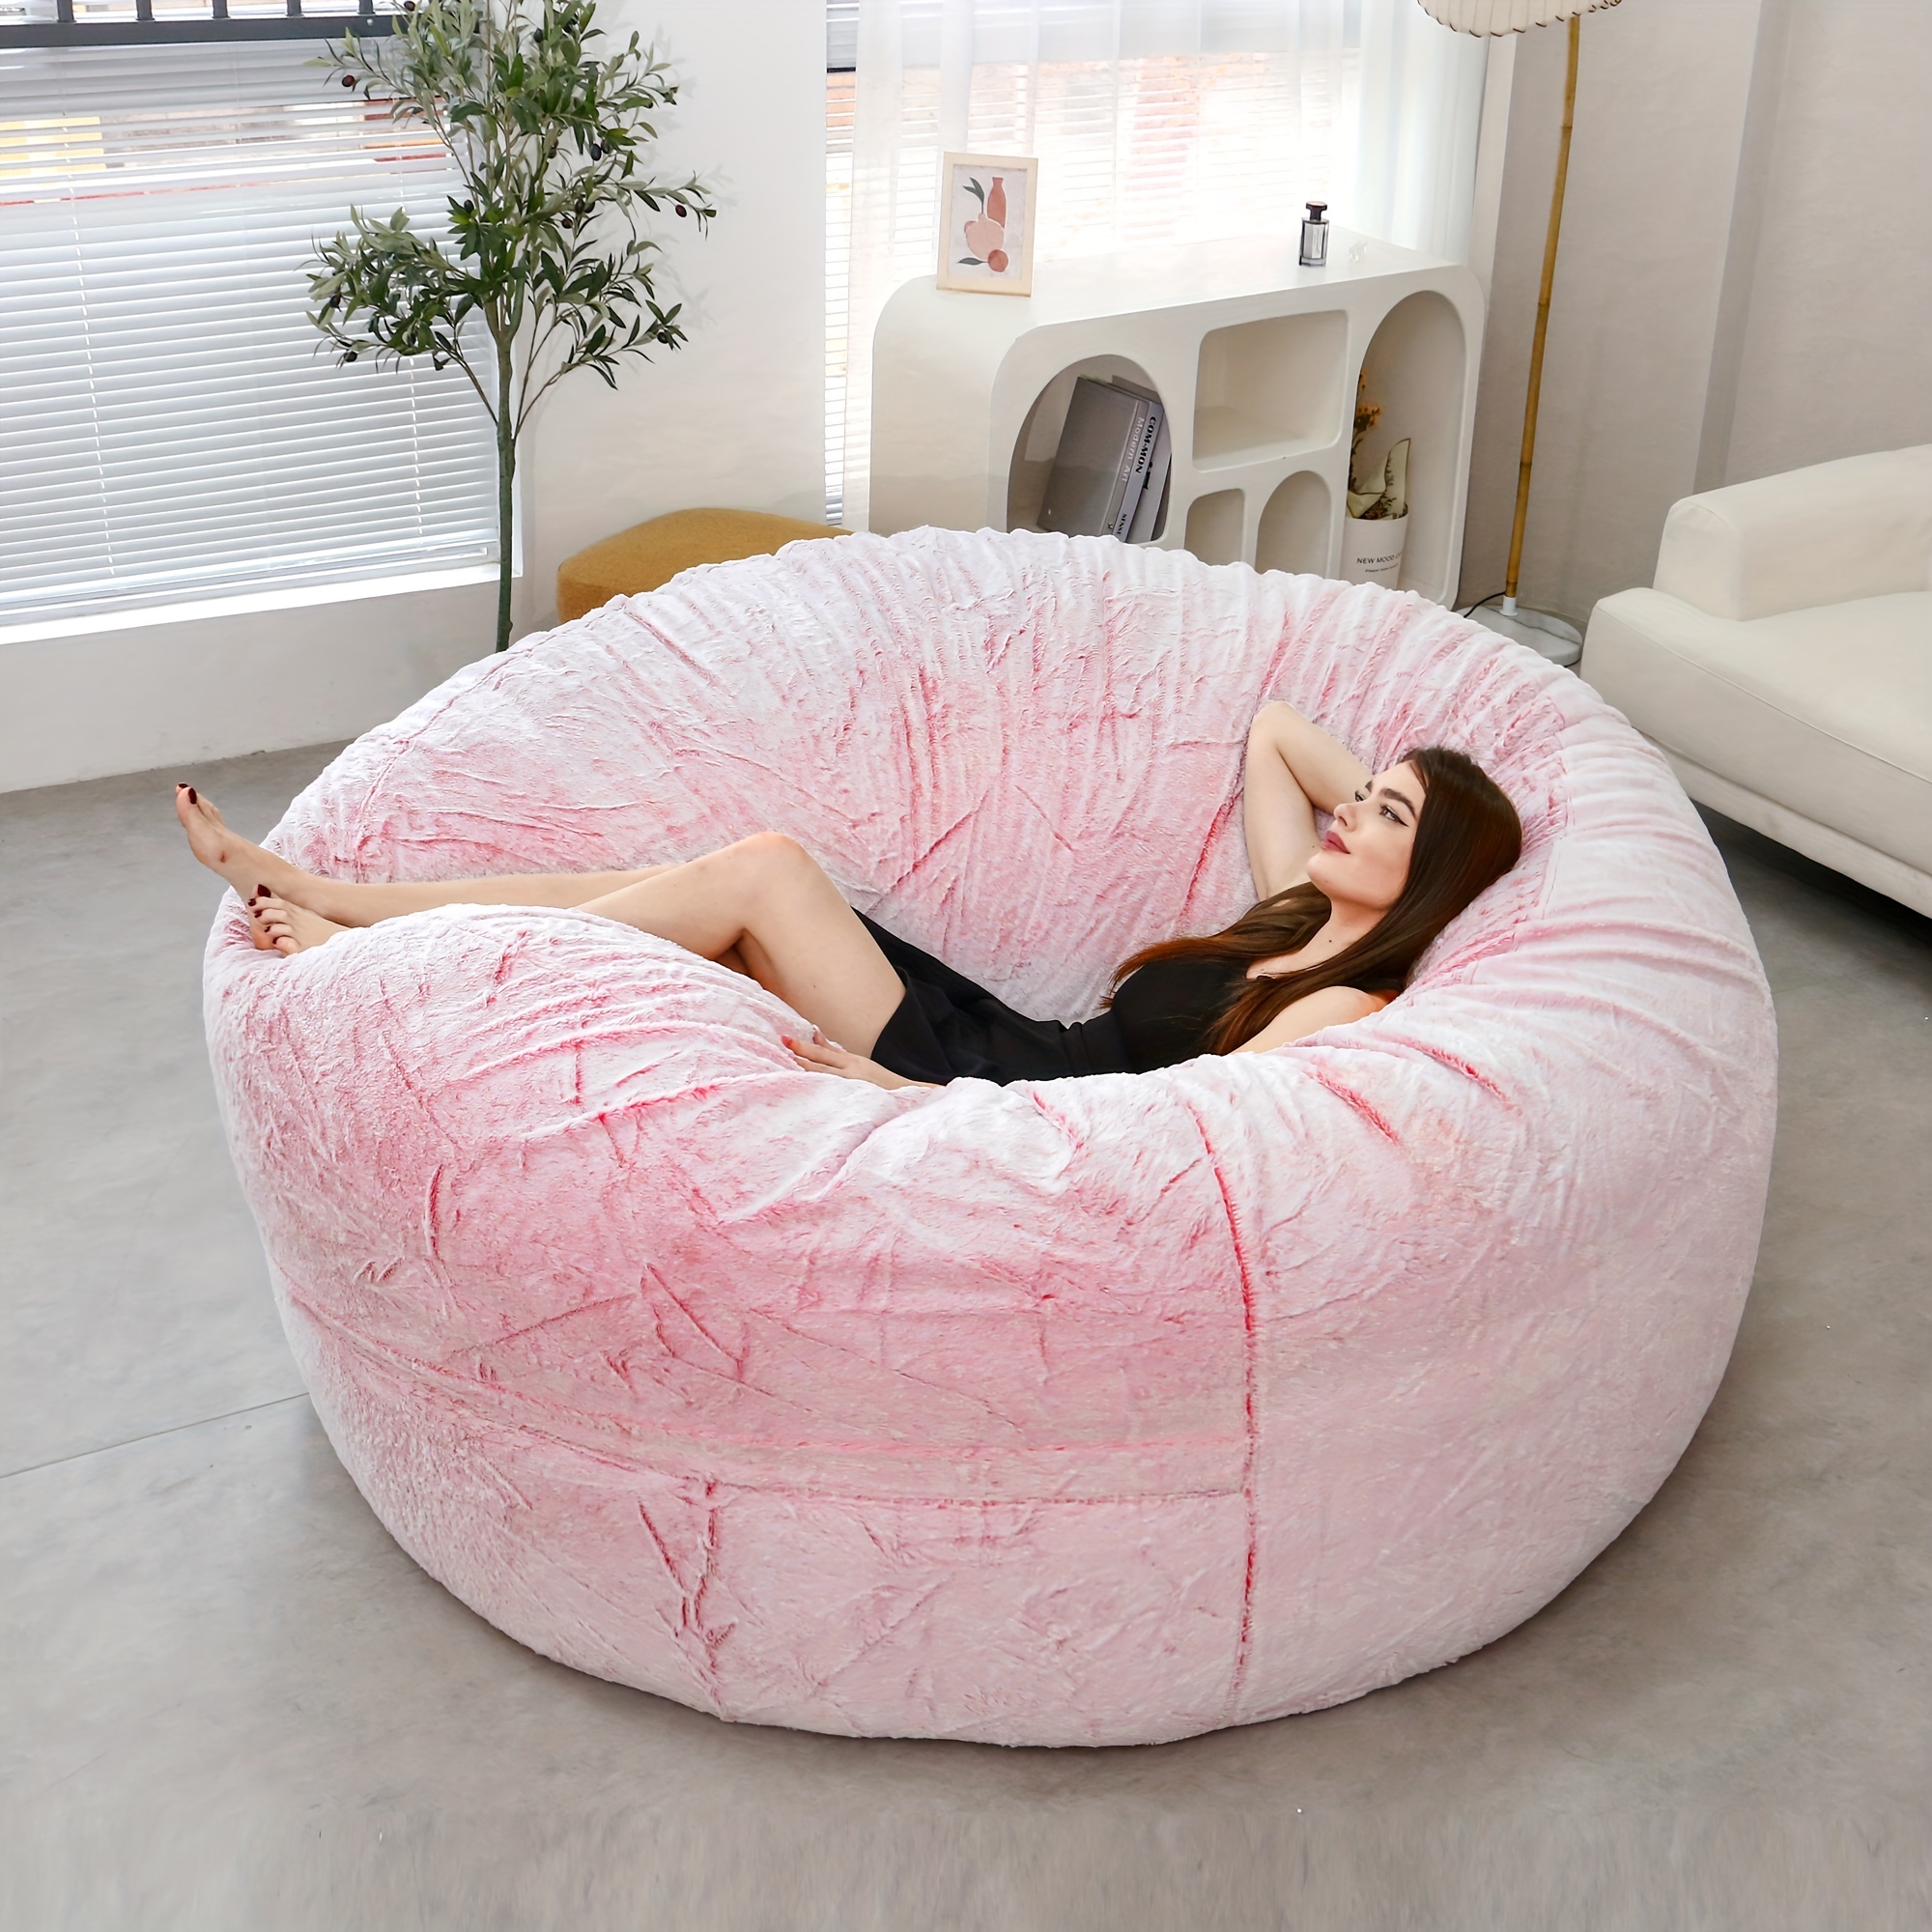 Amazon.com: 7FT Giant Fur Bean Bag Chair for Adult Living Room Furniture  Big Round Soft Fluffy Faux Fur BeanBag Lazy Sofa Bed Cover(it was only a  Cover, not a Full Bean Bag)